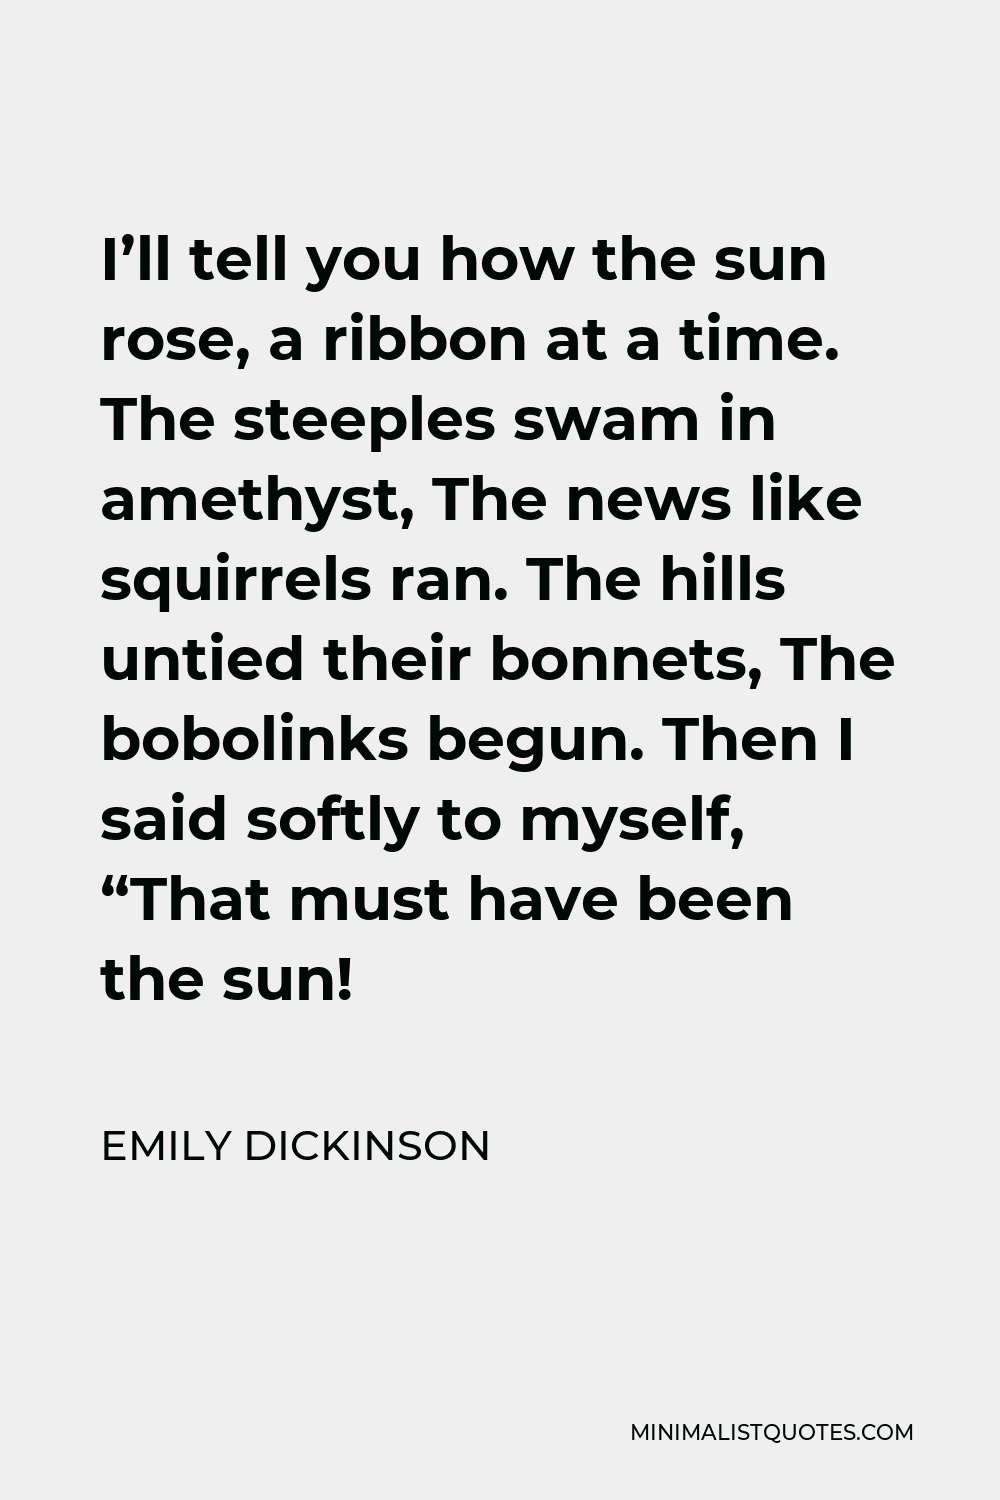 Emily Dickinson Quote - I’ll tell you how the sun rose, a ribbon at a time. The steeples swam in amethyst, The news like squirrels ran. The hills untied their bonnets, The bobolinks begun. Then I said softly to myself, “That must have been the sun!